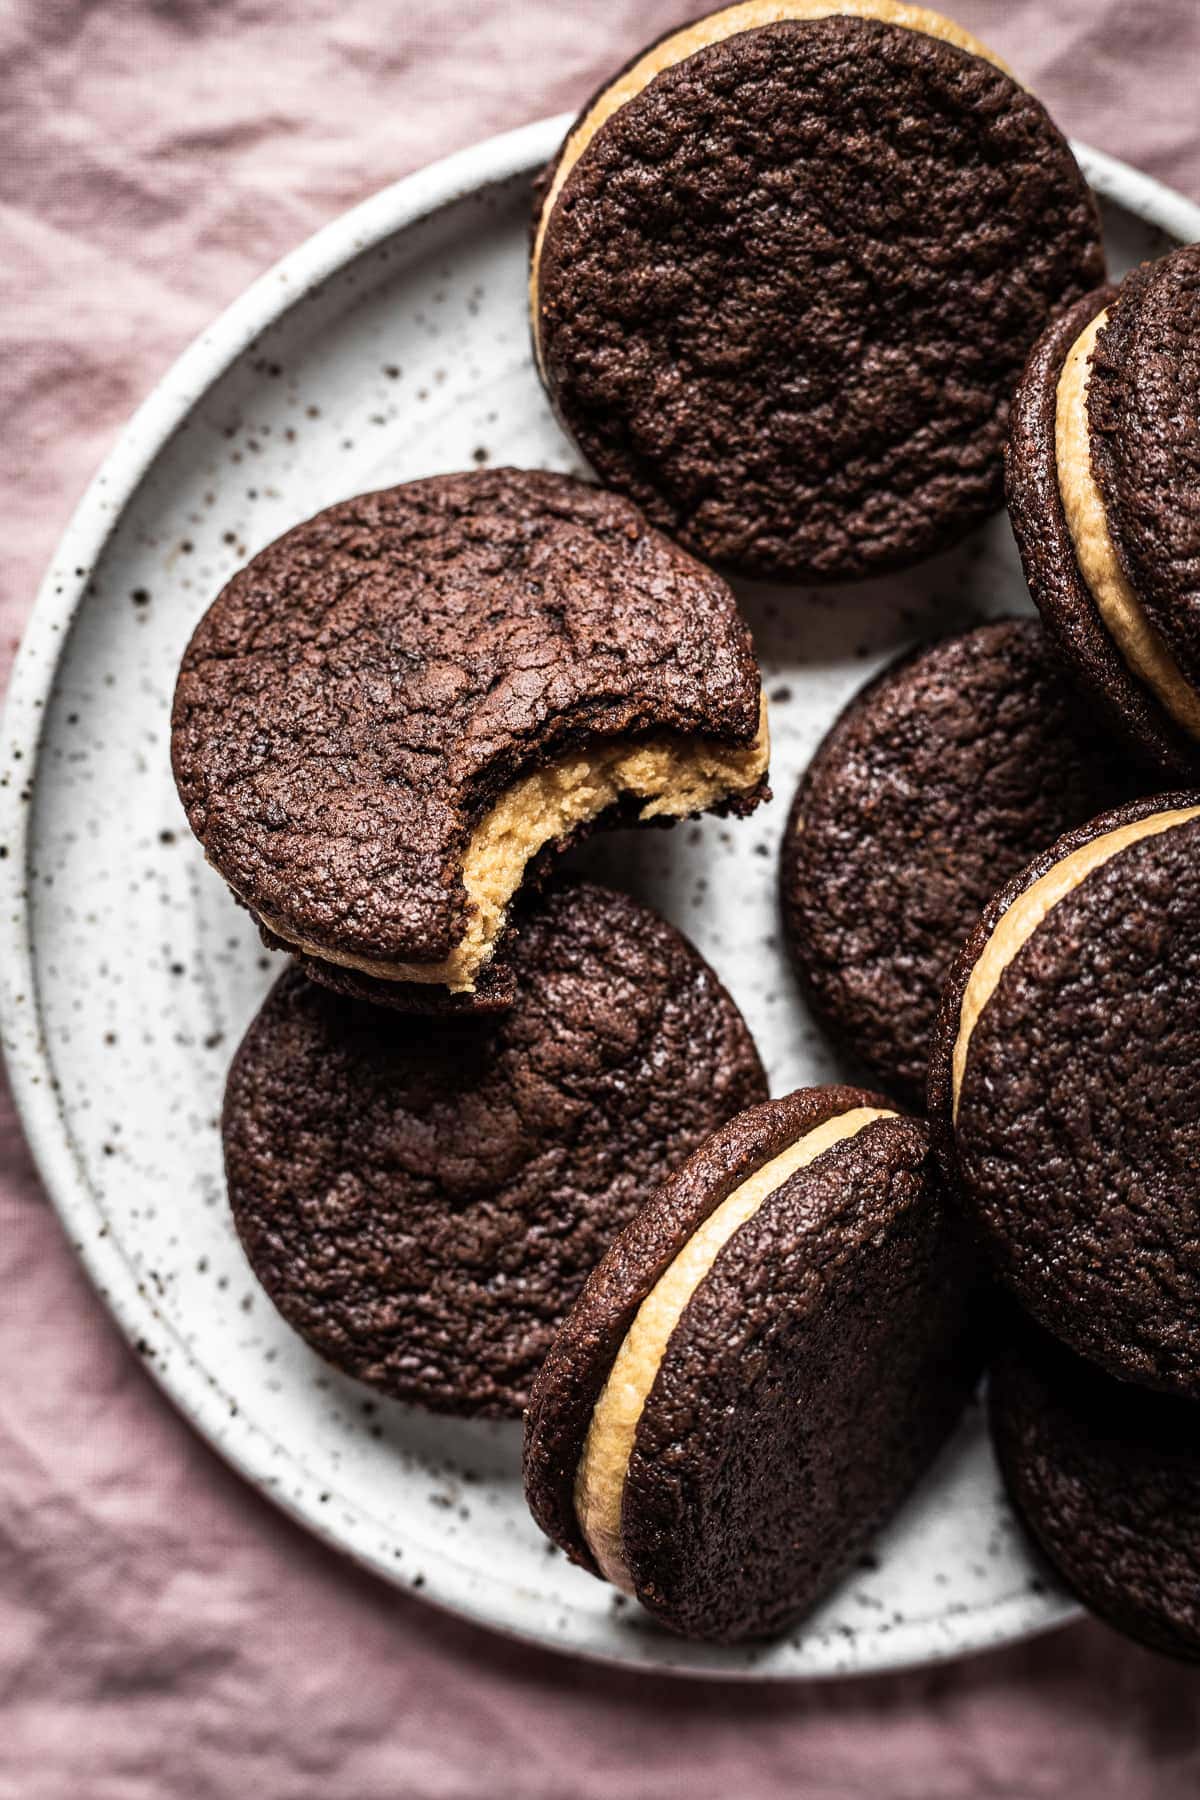 A pile of chocolate cookies on a speckled white ceramic plate on a pink linen surface. One cookie has a bite taken from it.